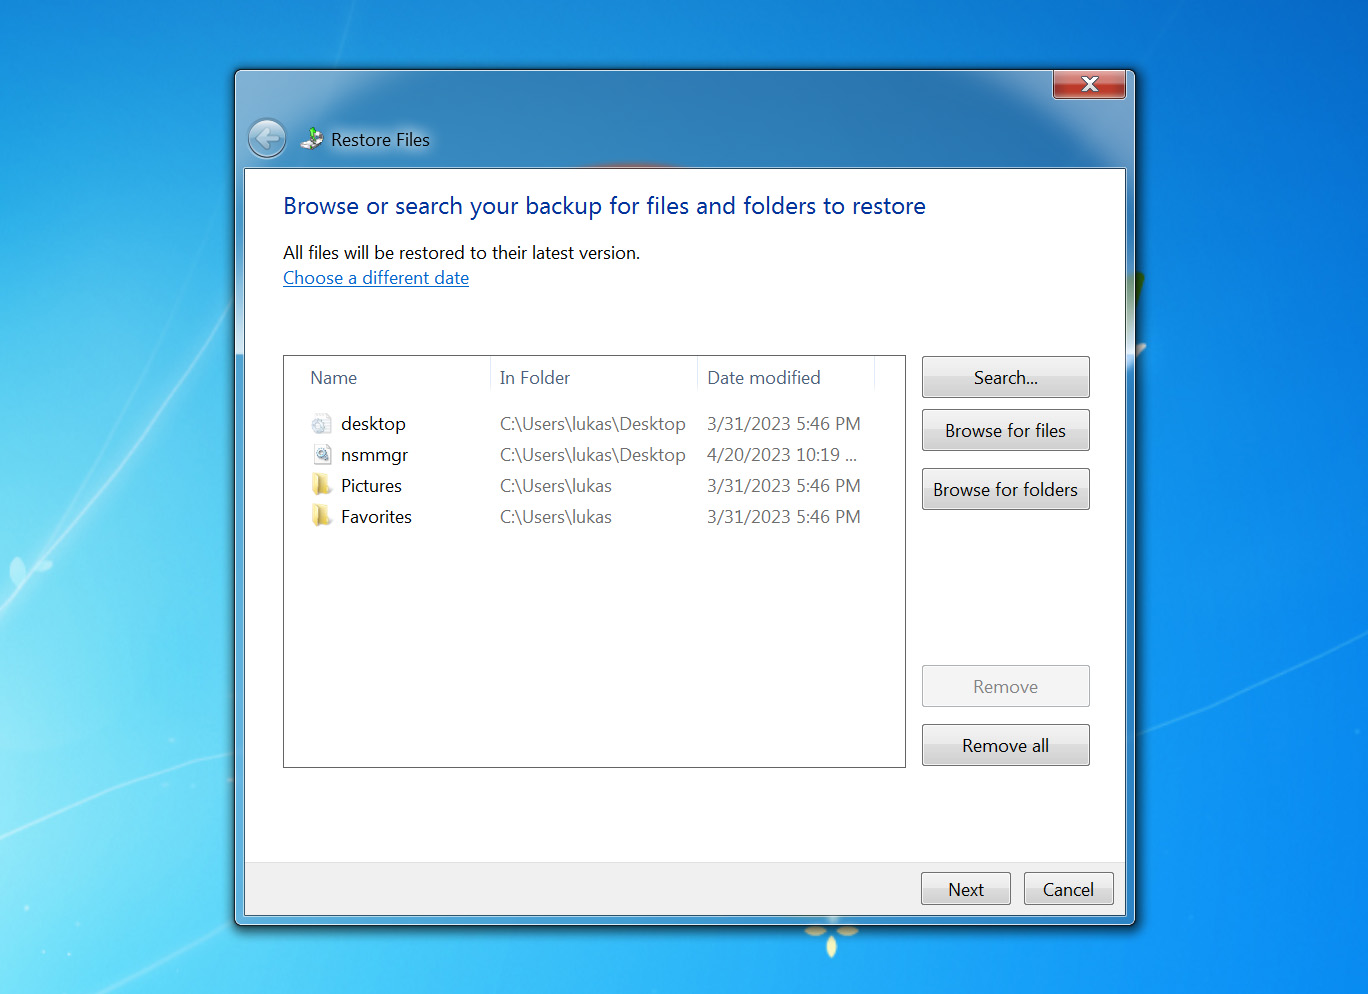  Graphic guide demonstrating the Backup and Restore feature in Windows 7, a tool for recovering deleted photos